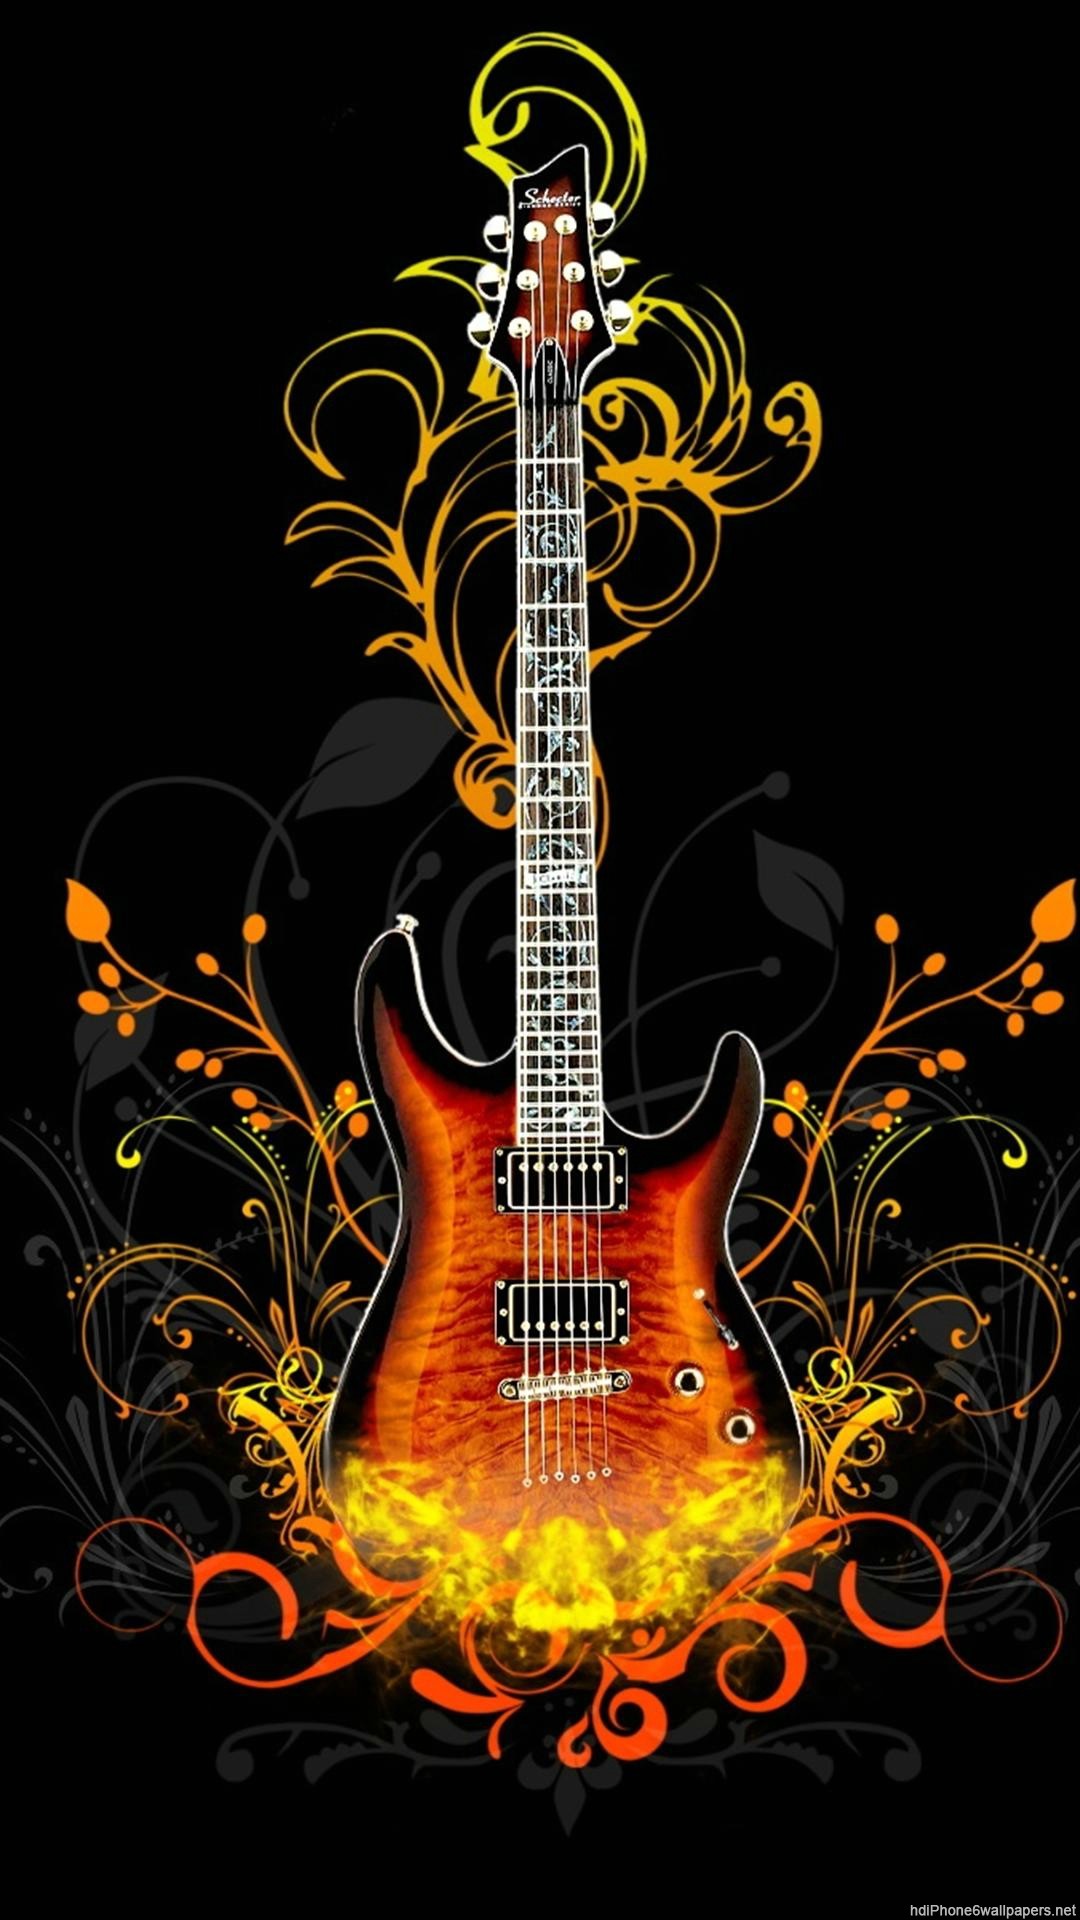 1080x1920 ... abstract guitar iphone 6 wallpapers hd and 1080p 6 plus wallpapers ...